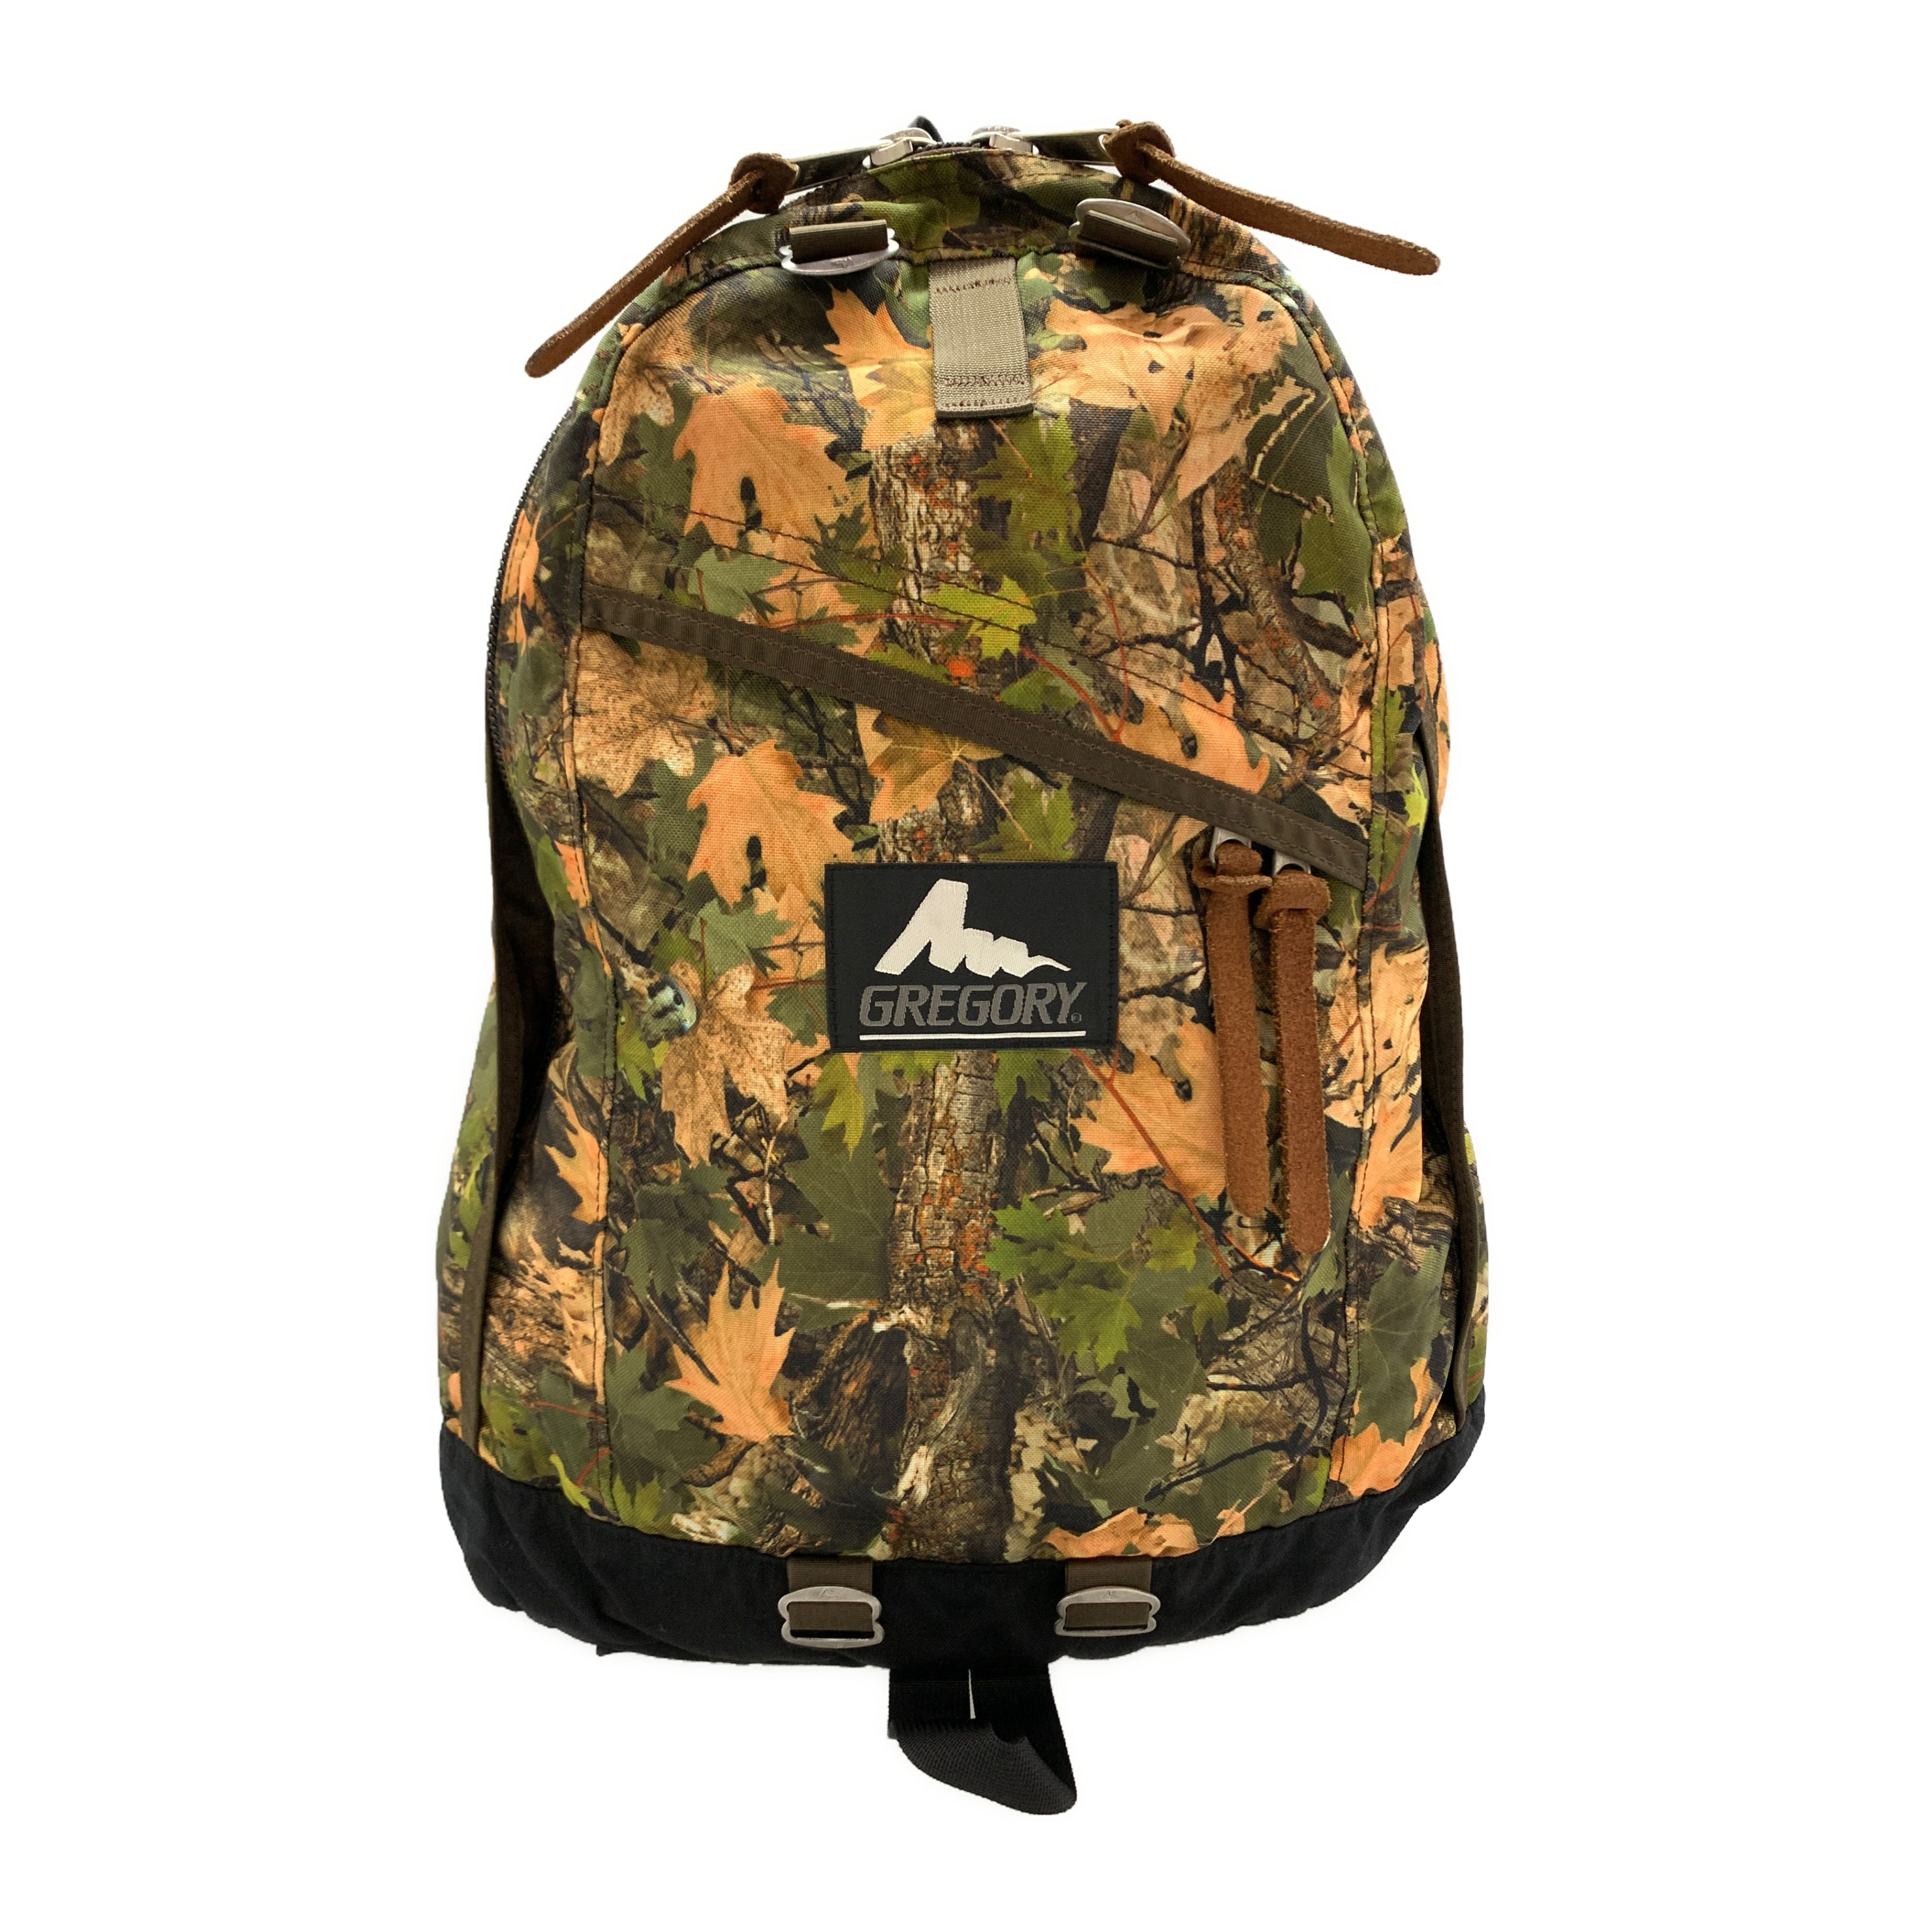 GREGORY/Backpack/CML/Polyester/Camouflage – 2nd STREET USA